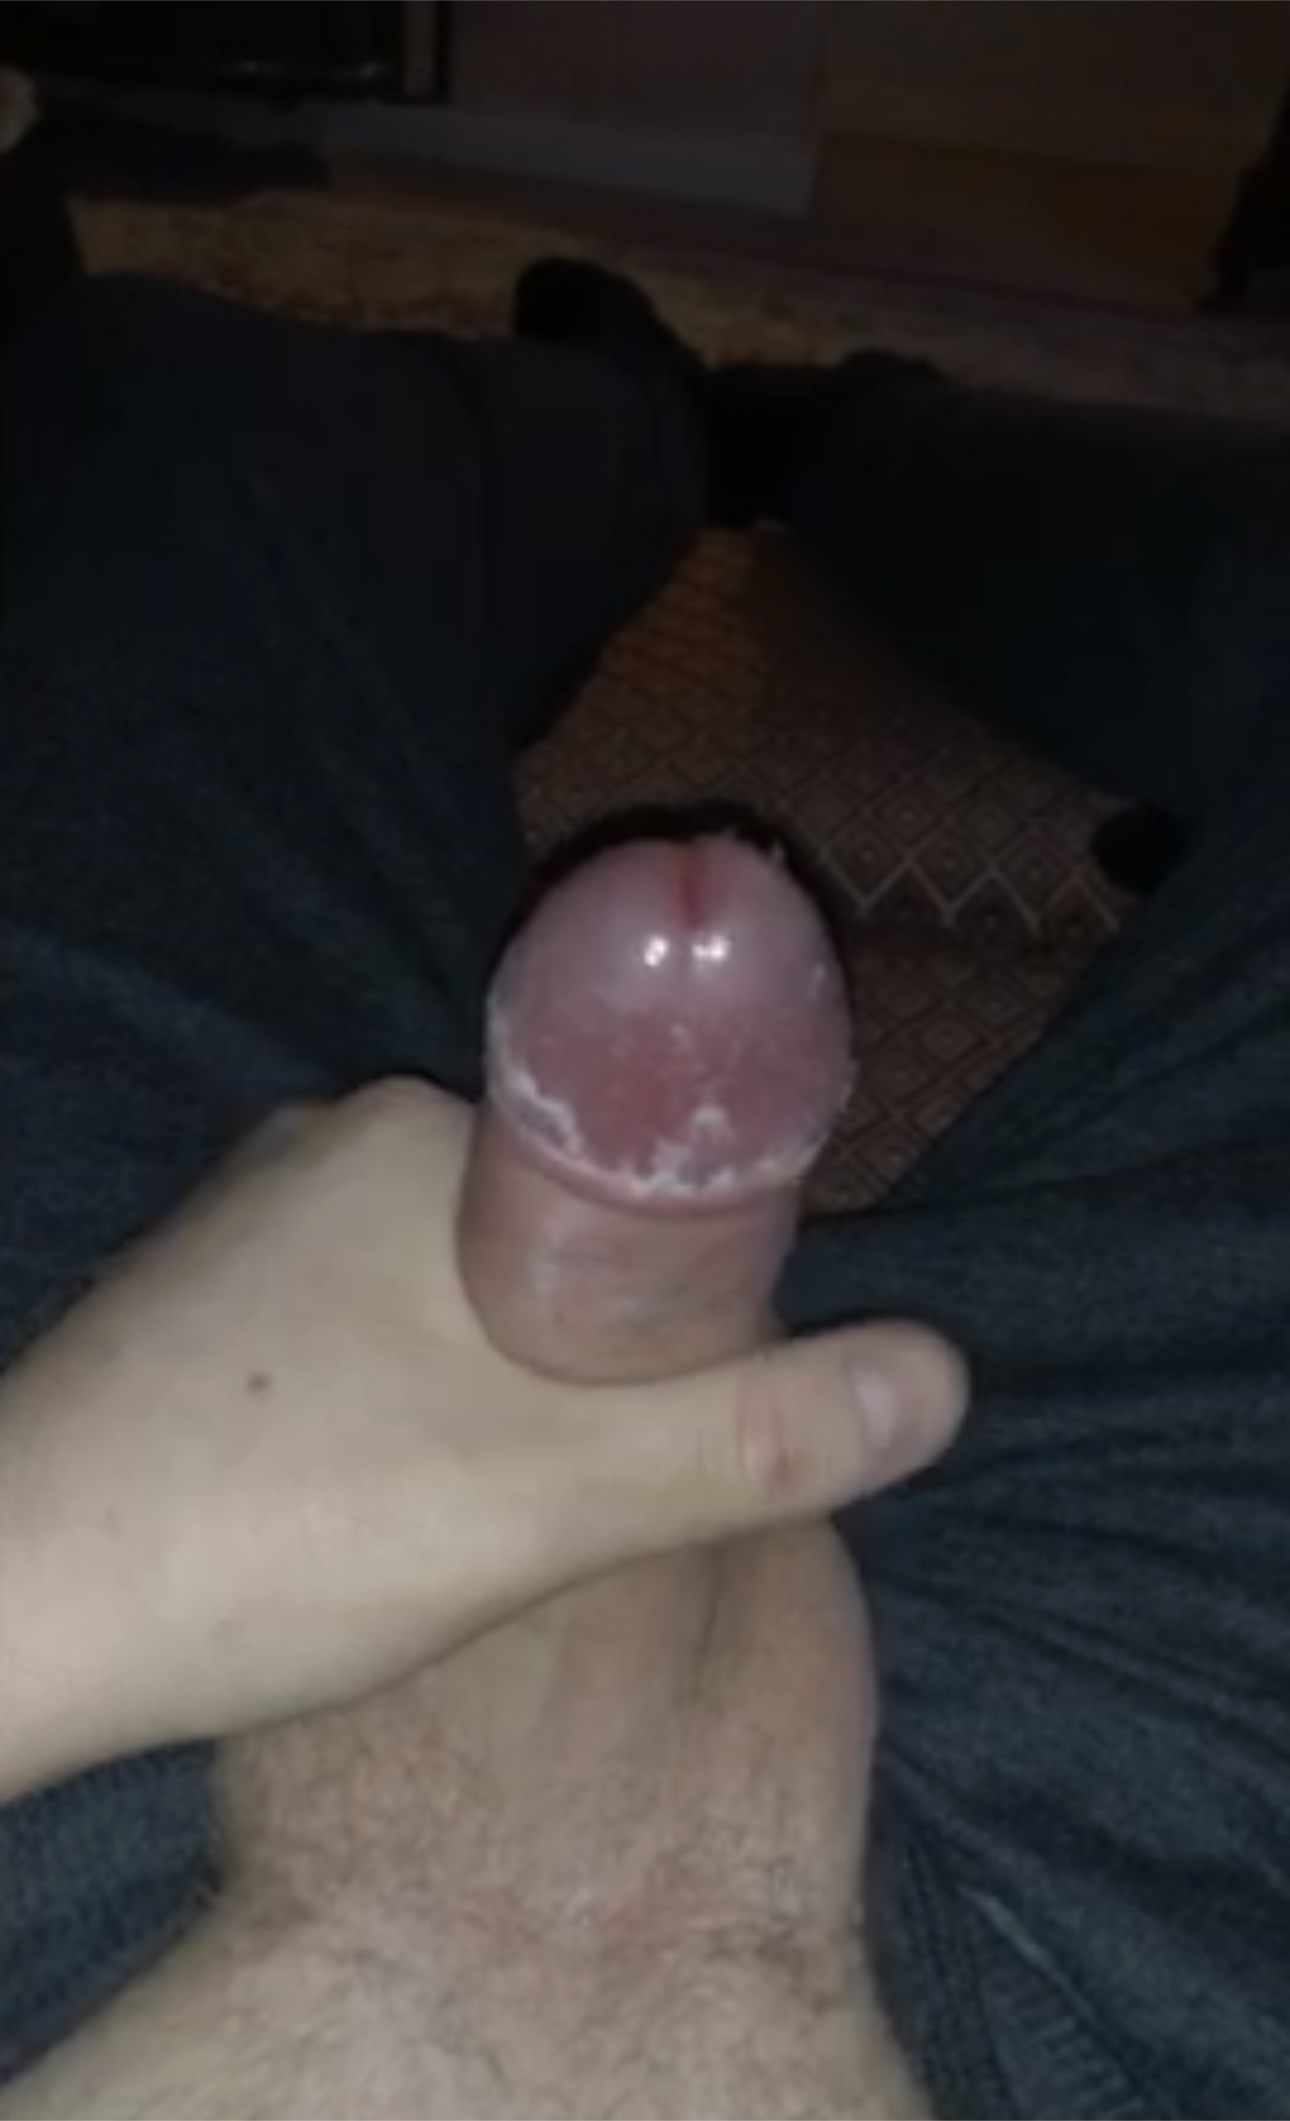 Twink plays with the thick smegma covering his cock